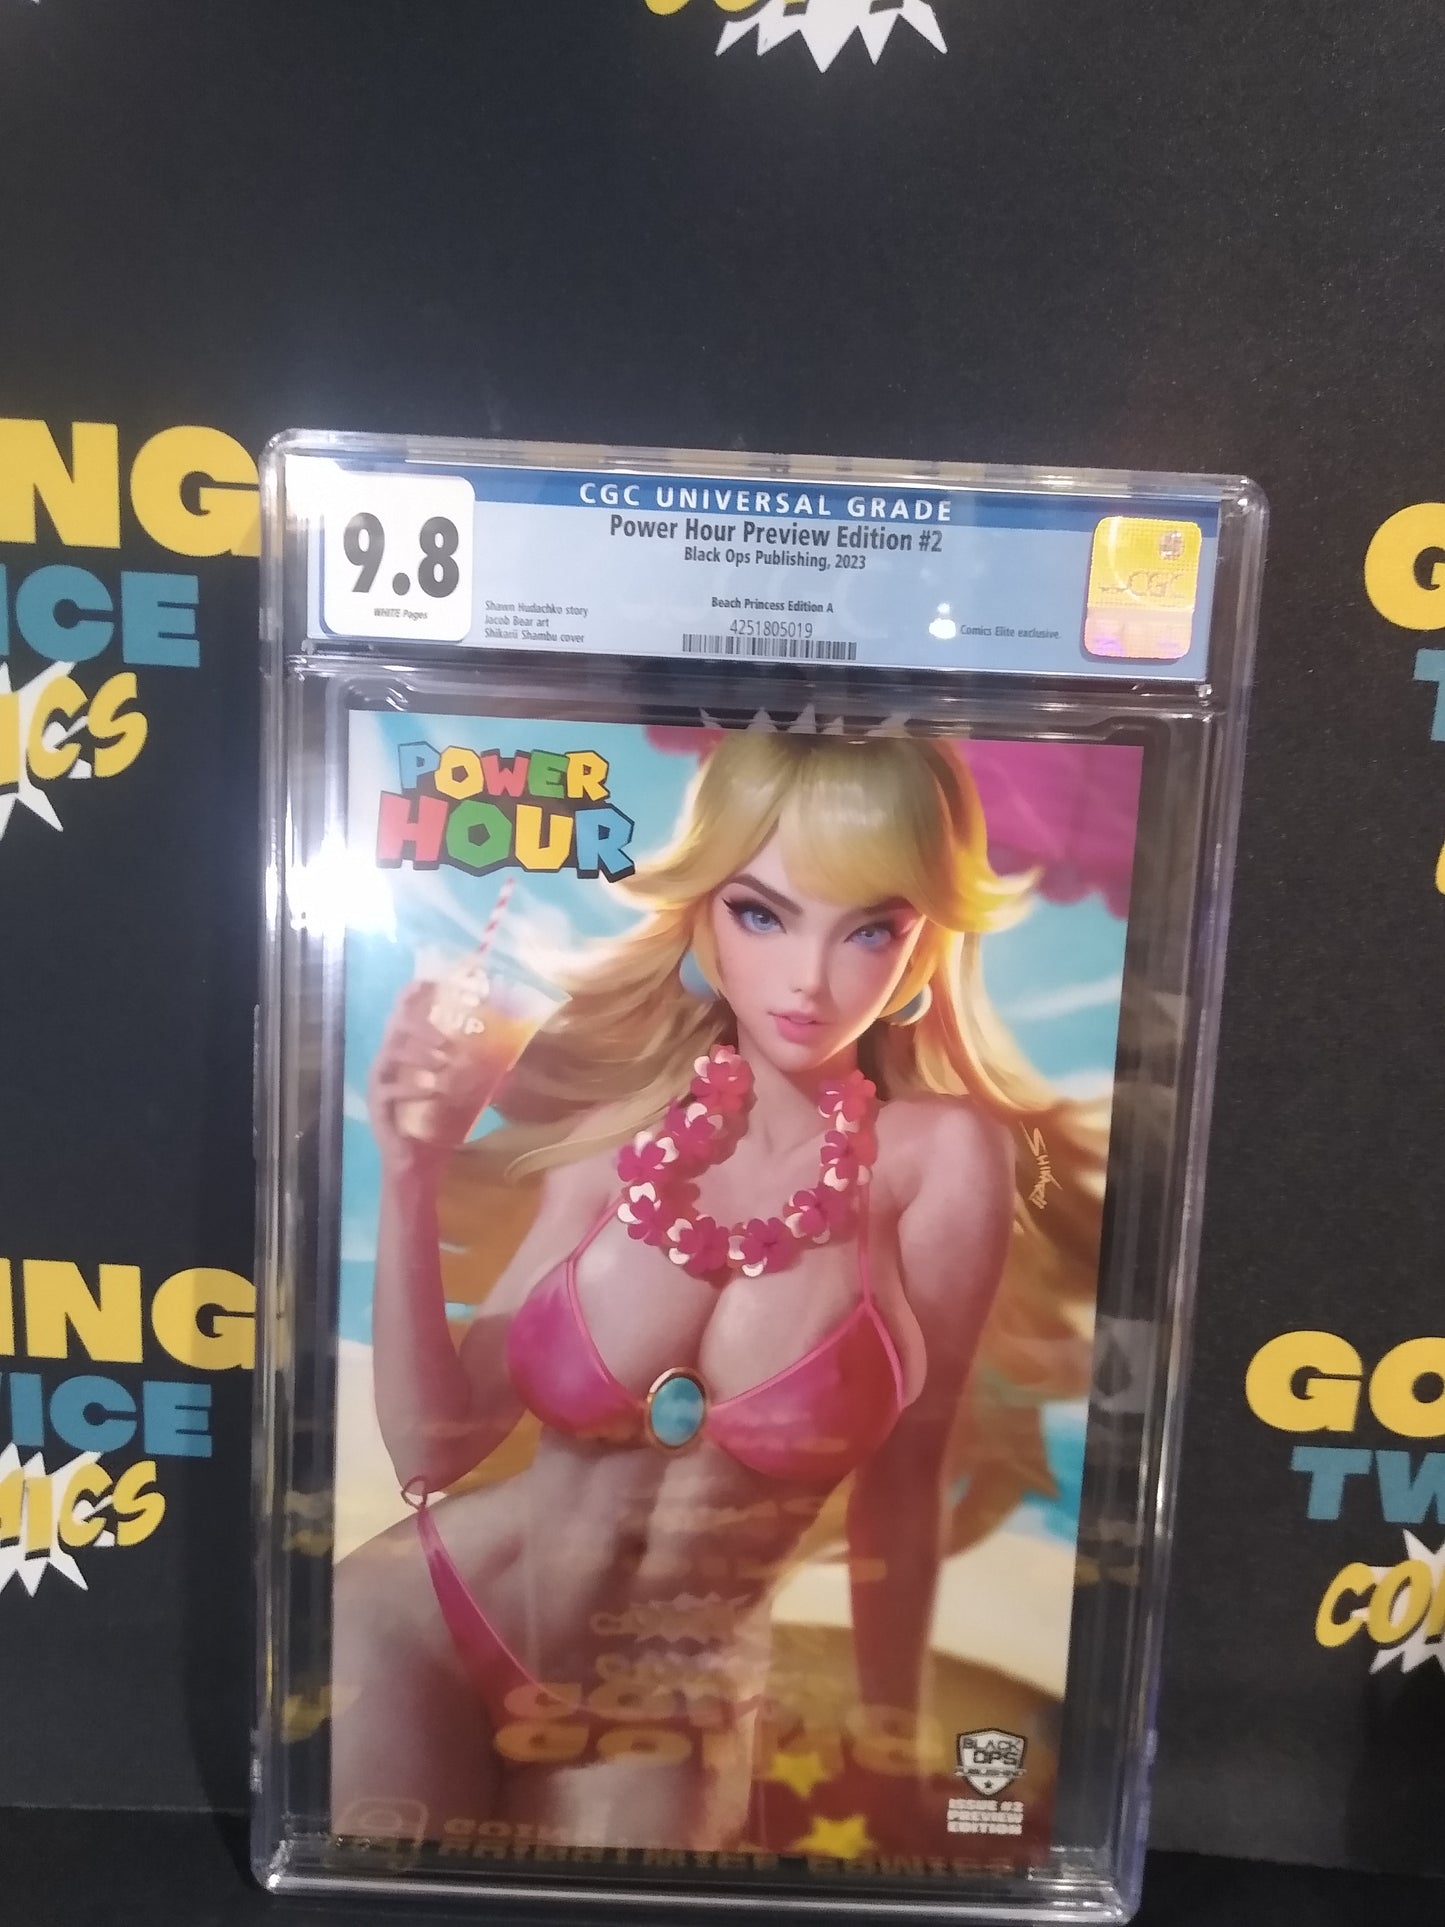 Power Hour Preview Edition Beach Princess Edition A Black Ops Comic #2 Graded CGC 9.8